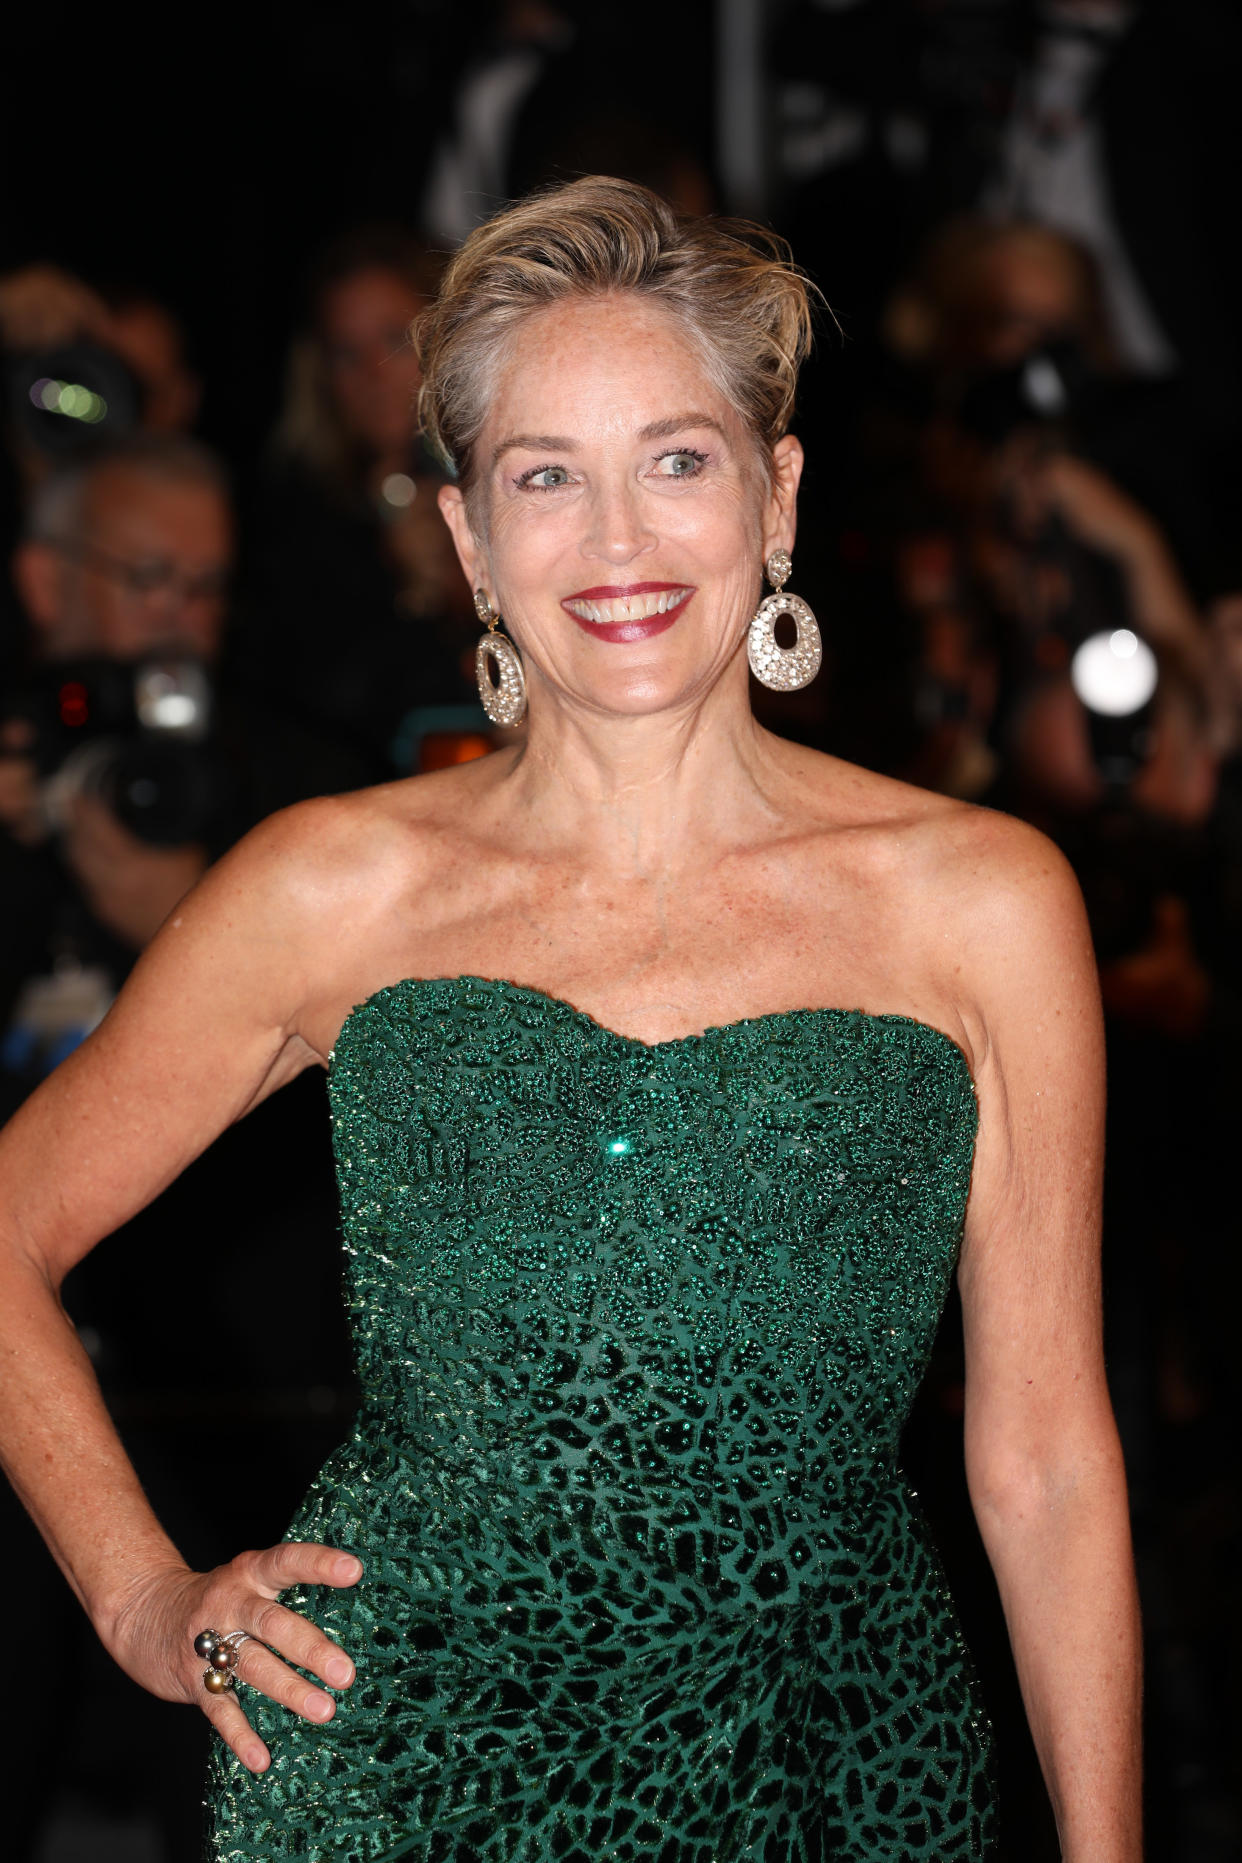 Sharon Stone exuded Hollywood glamour on the Cannes red carpet. (Getty Images)